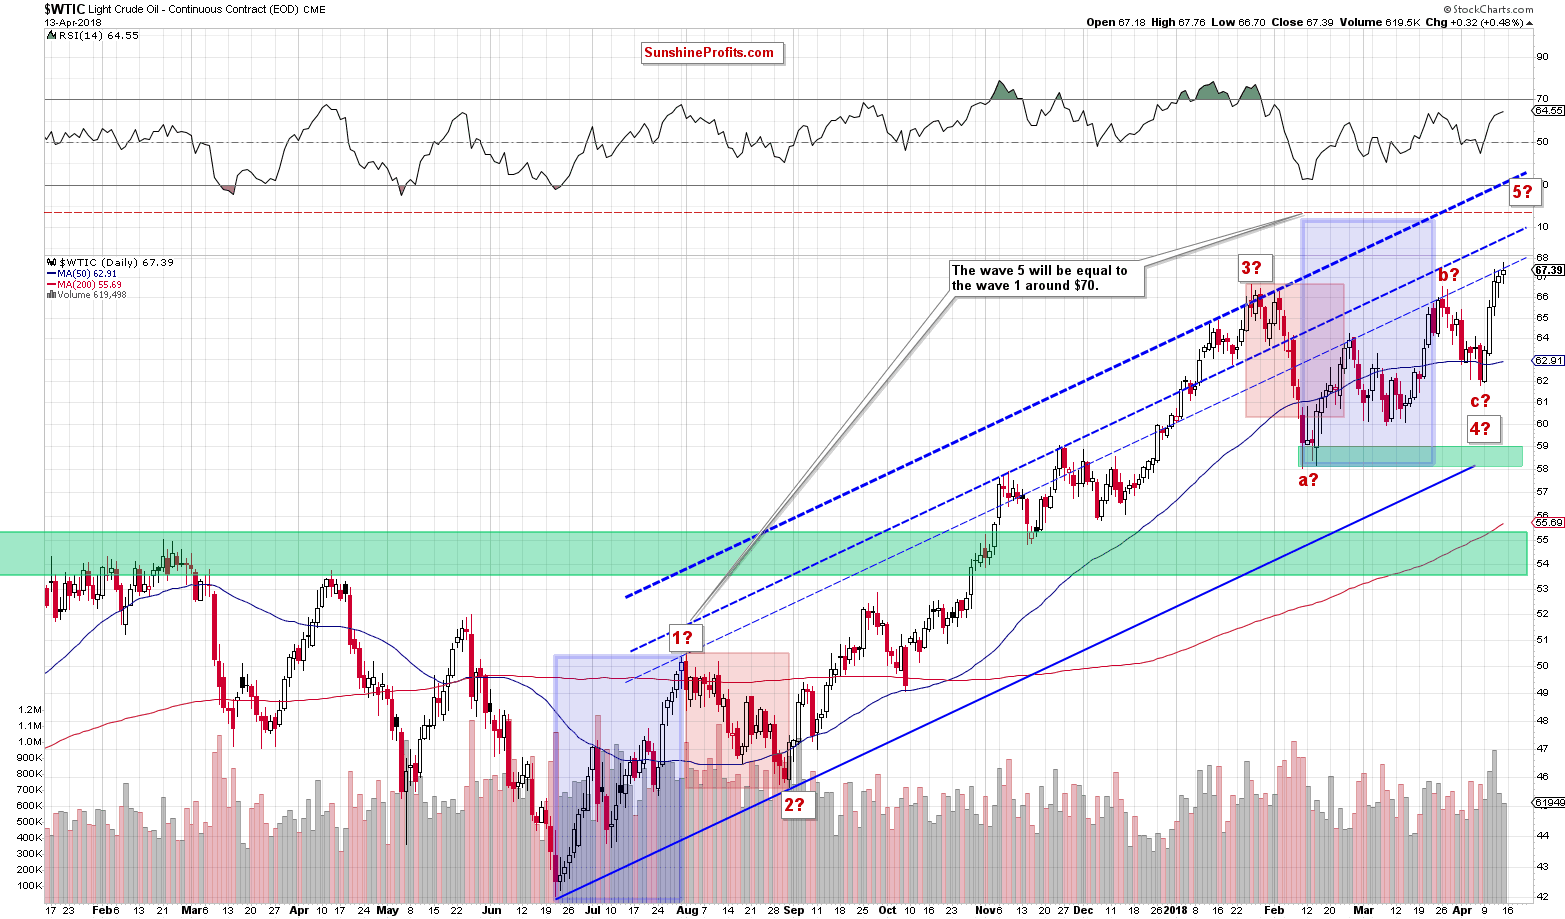 Crude oil daily chart WTIC target